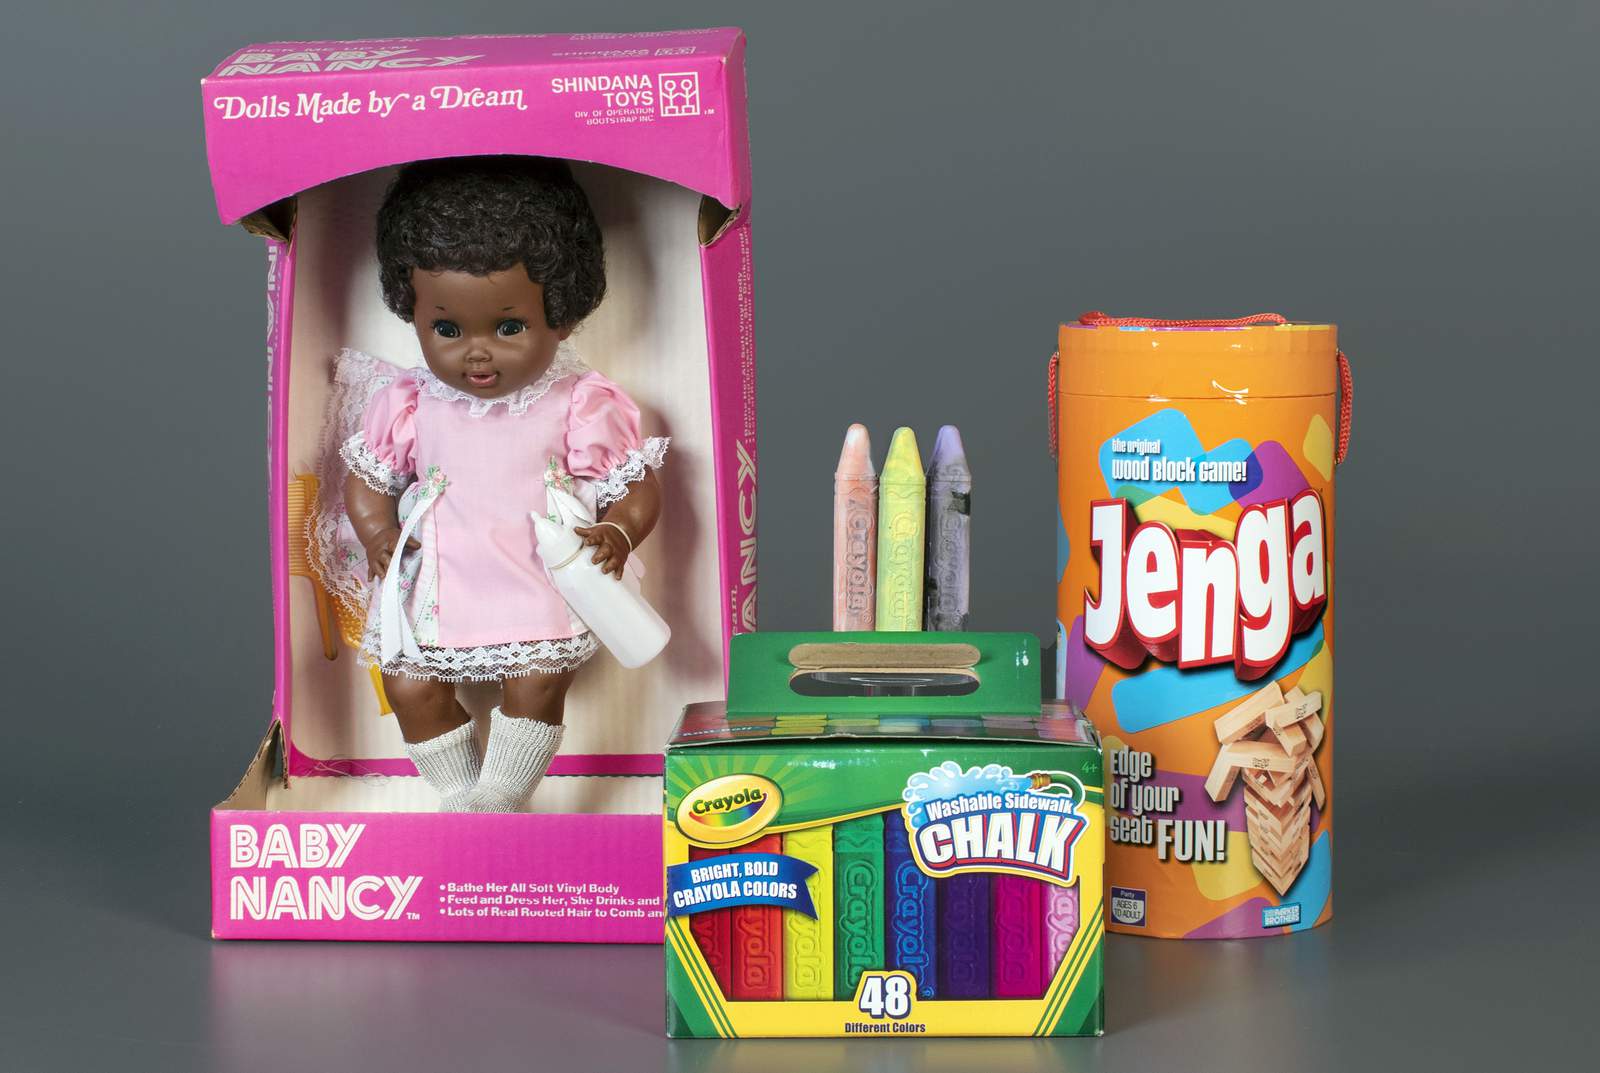 Pioneering Black doll Baby Nancy enters Toy Hall of Fame